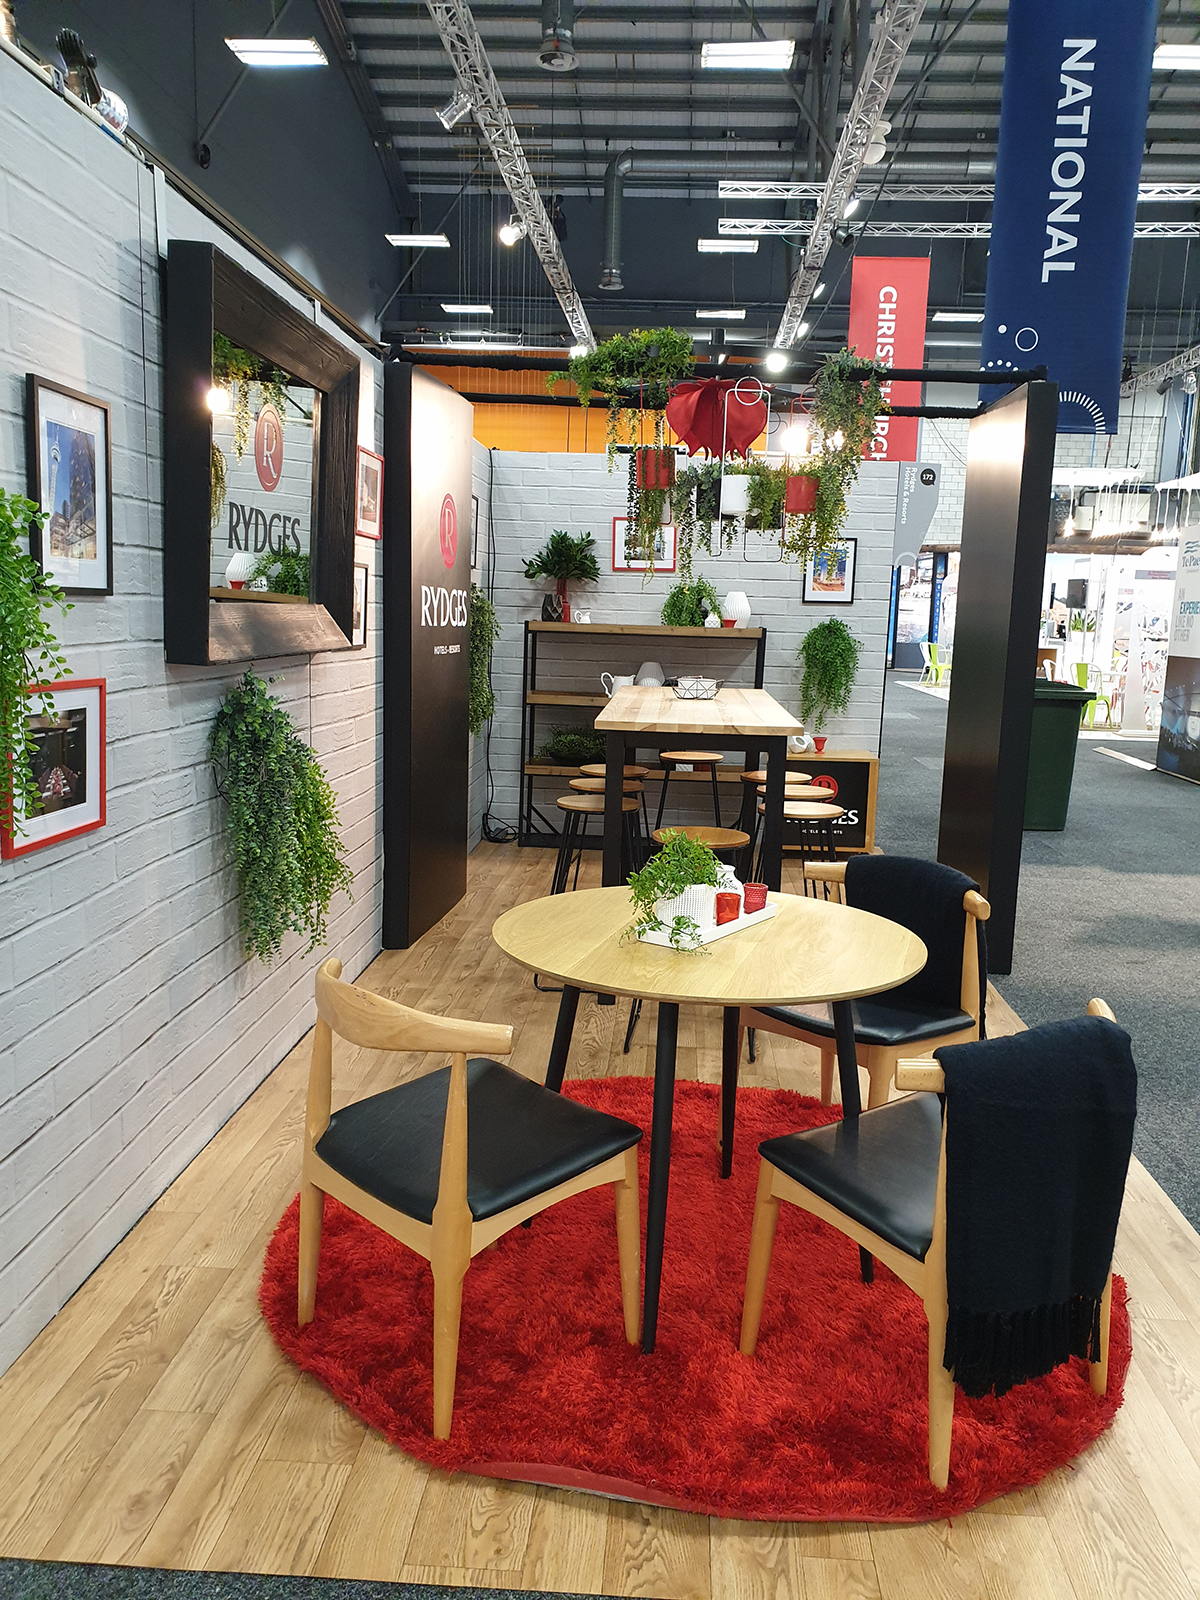 Exhibition Design ... Rydges Hotels and Resorts Expo Stand, MEETINGS 2019